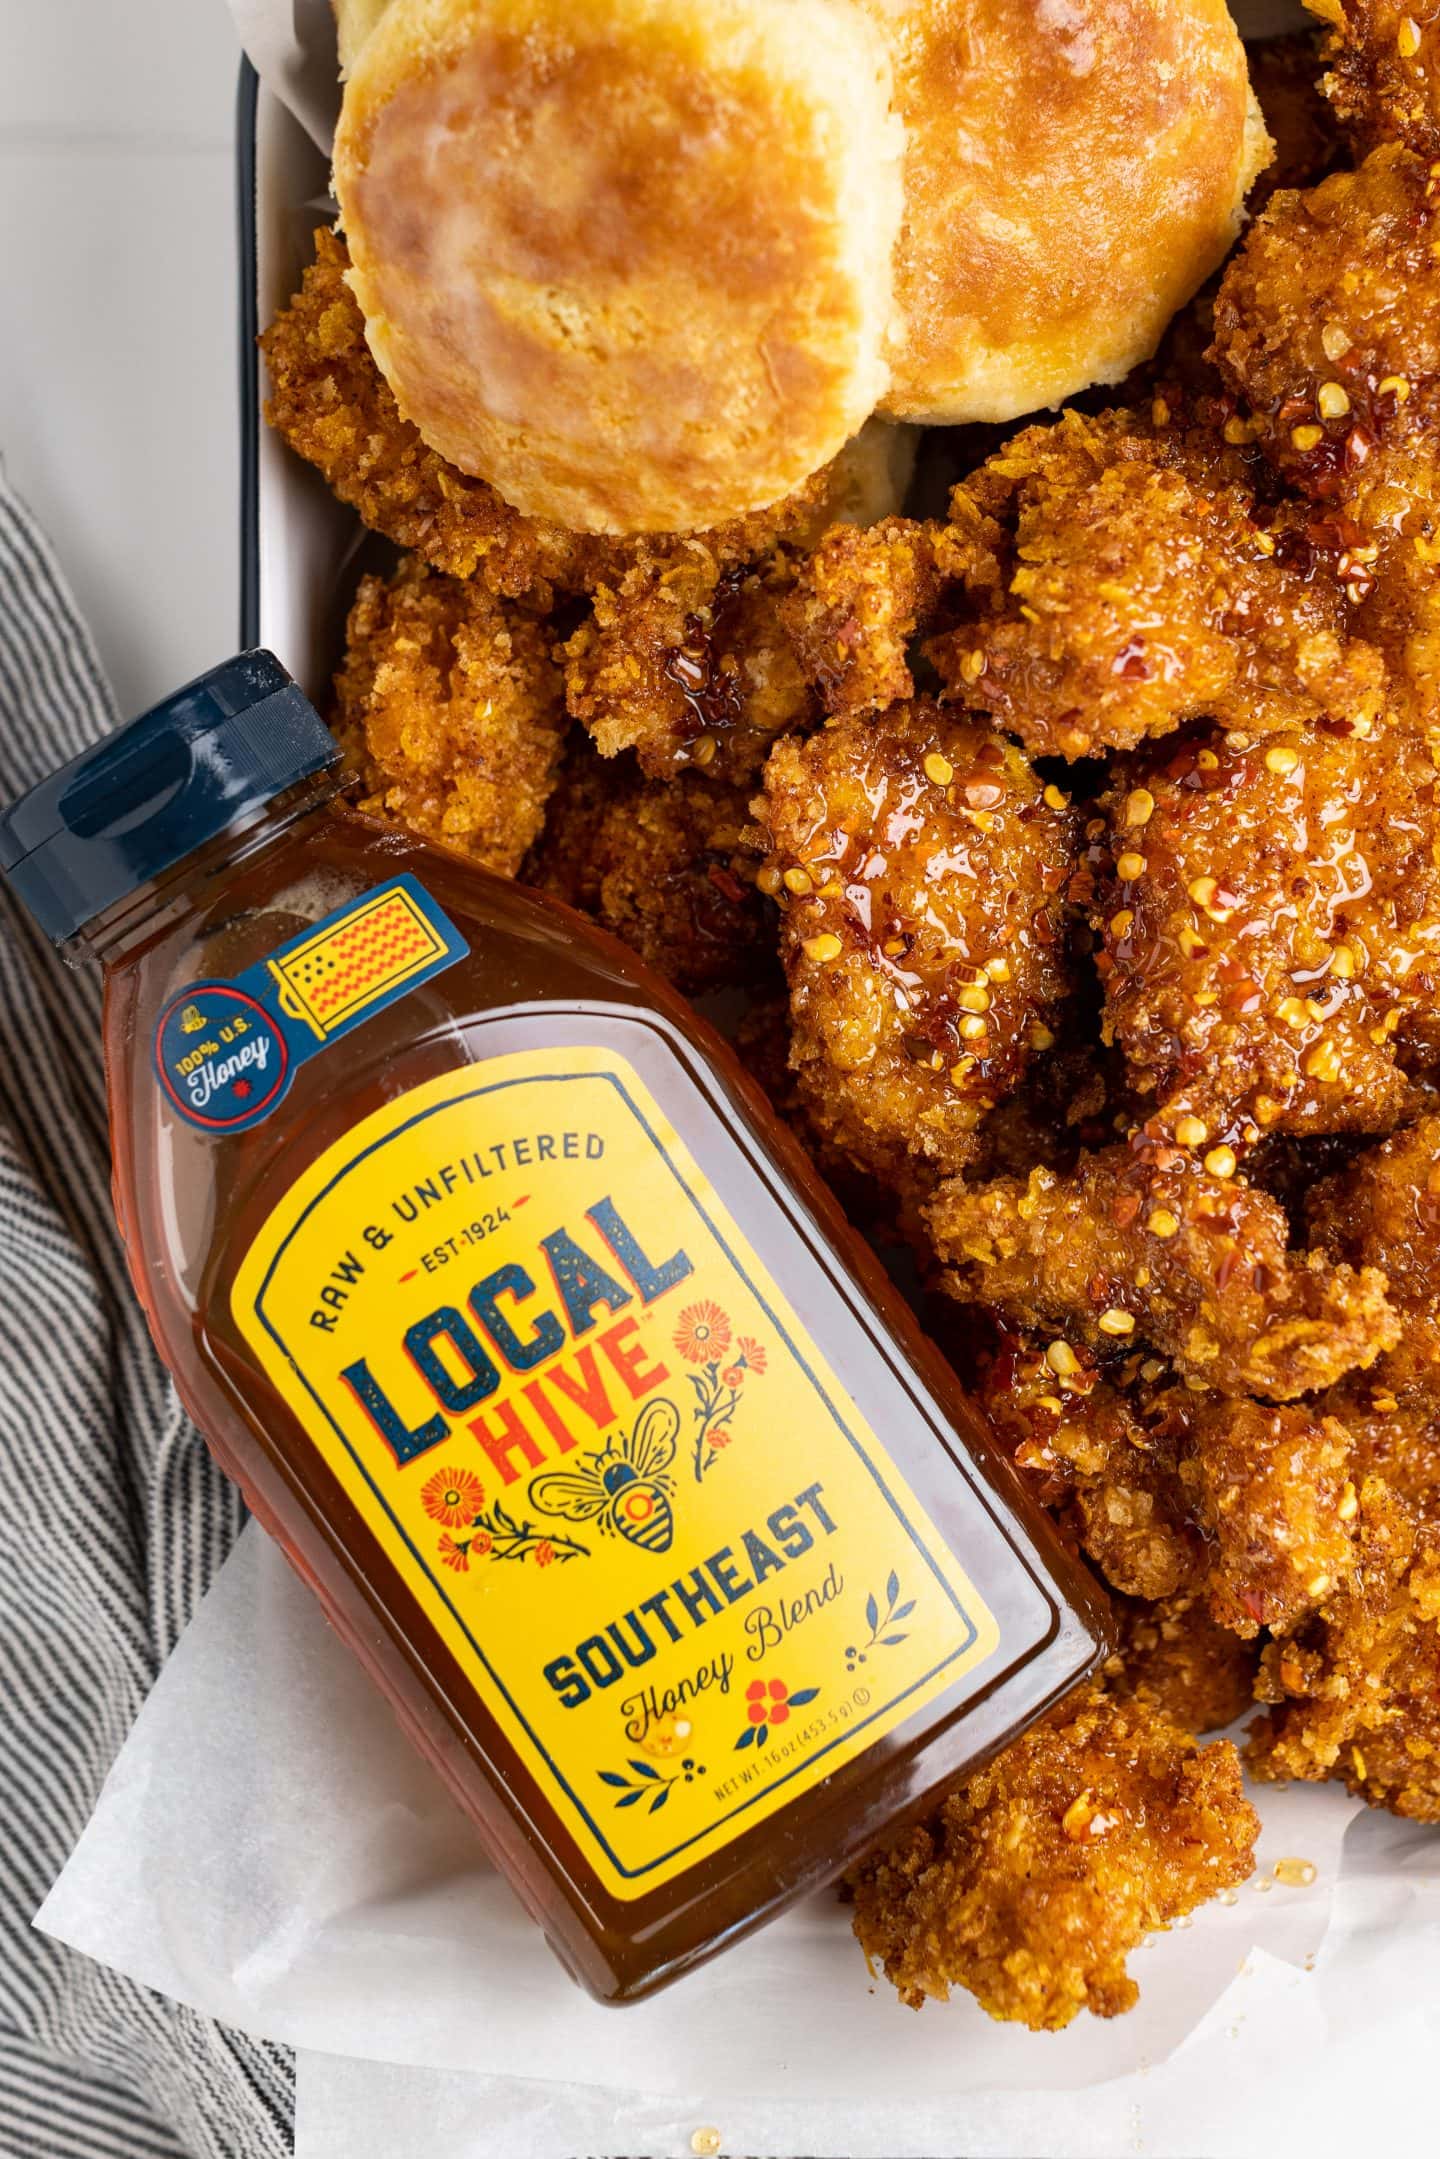 hot honey chicken next to local hive honey southeast